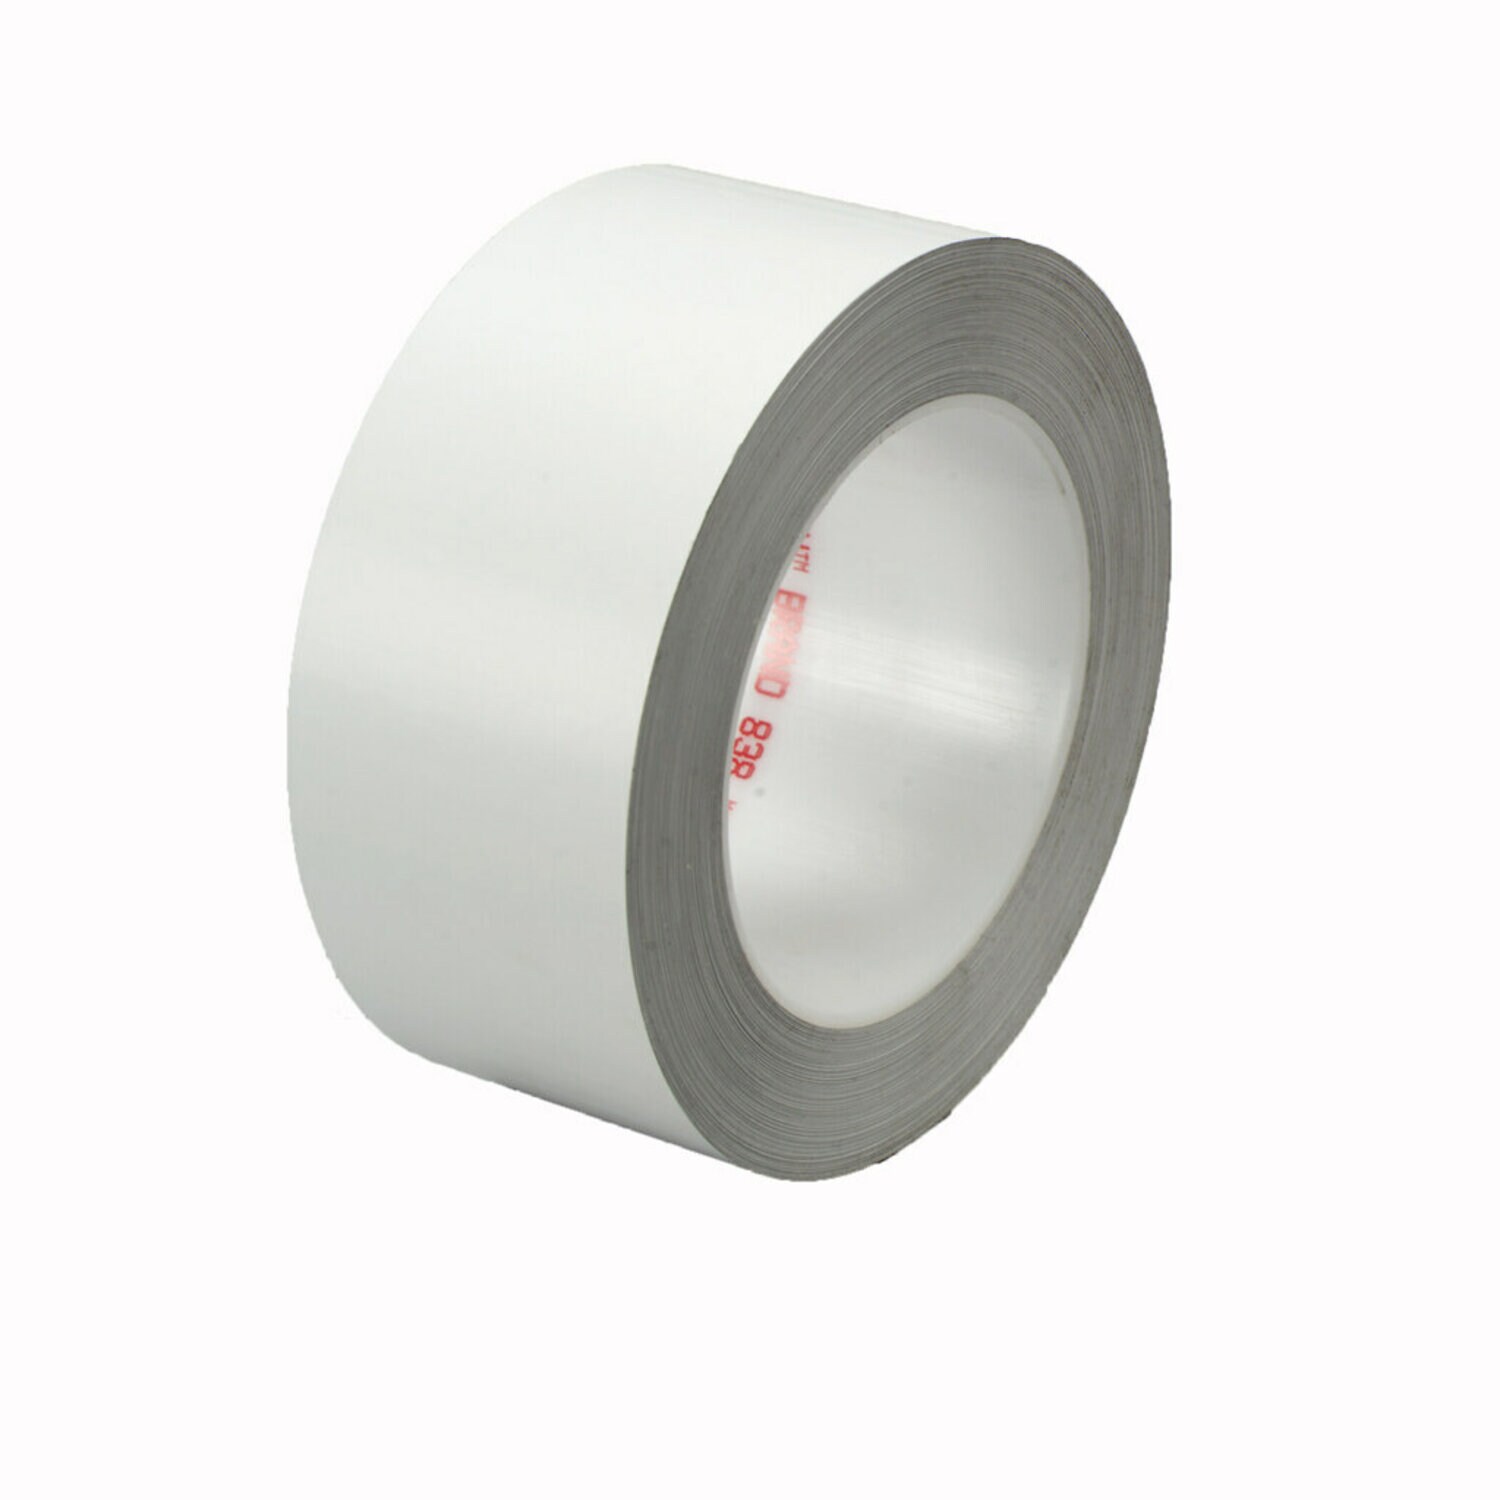 7010048657 - 3M Weather Resistant Film Tape 838, White, 2 in x 36 yd, 3.4 mil, 24
rolls per case